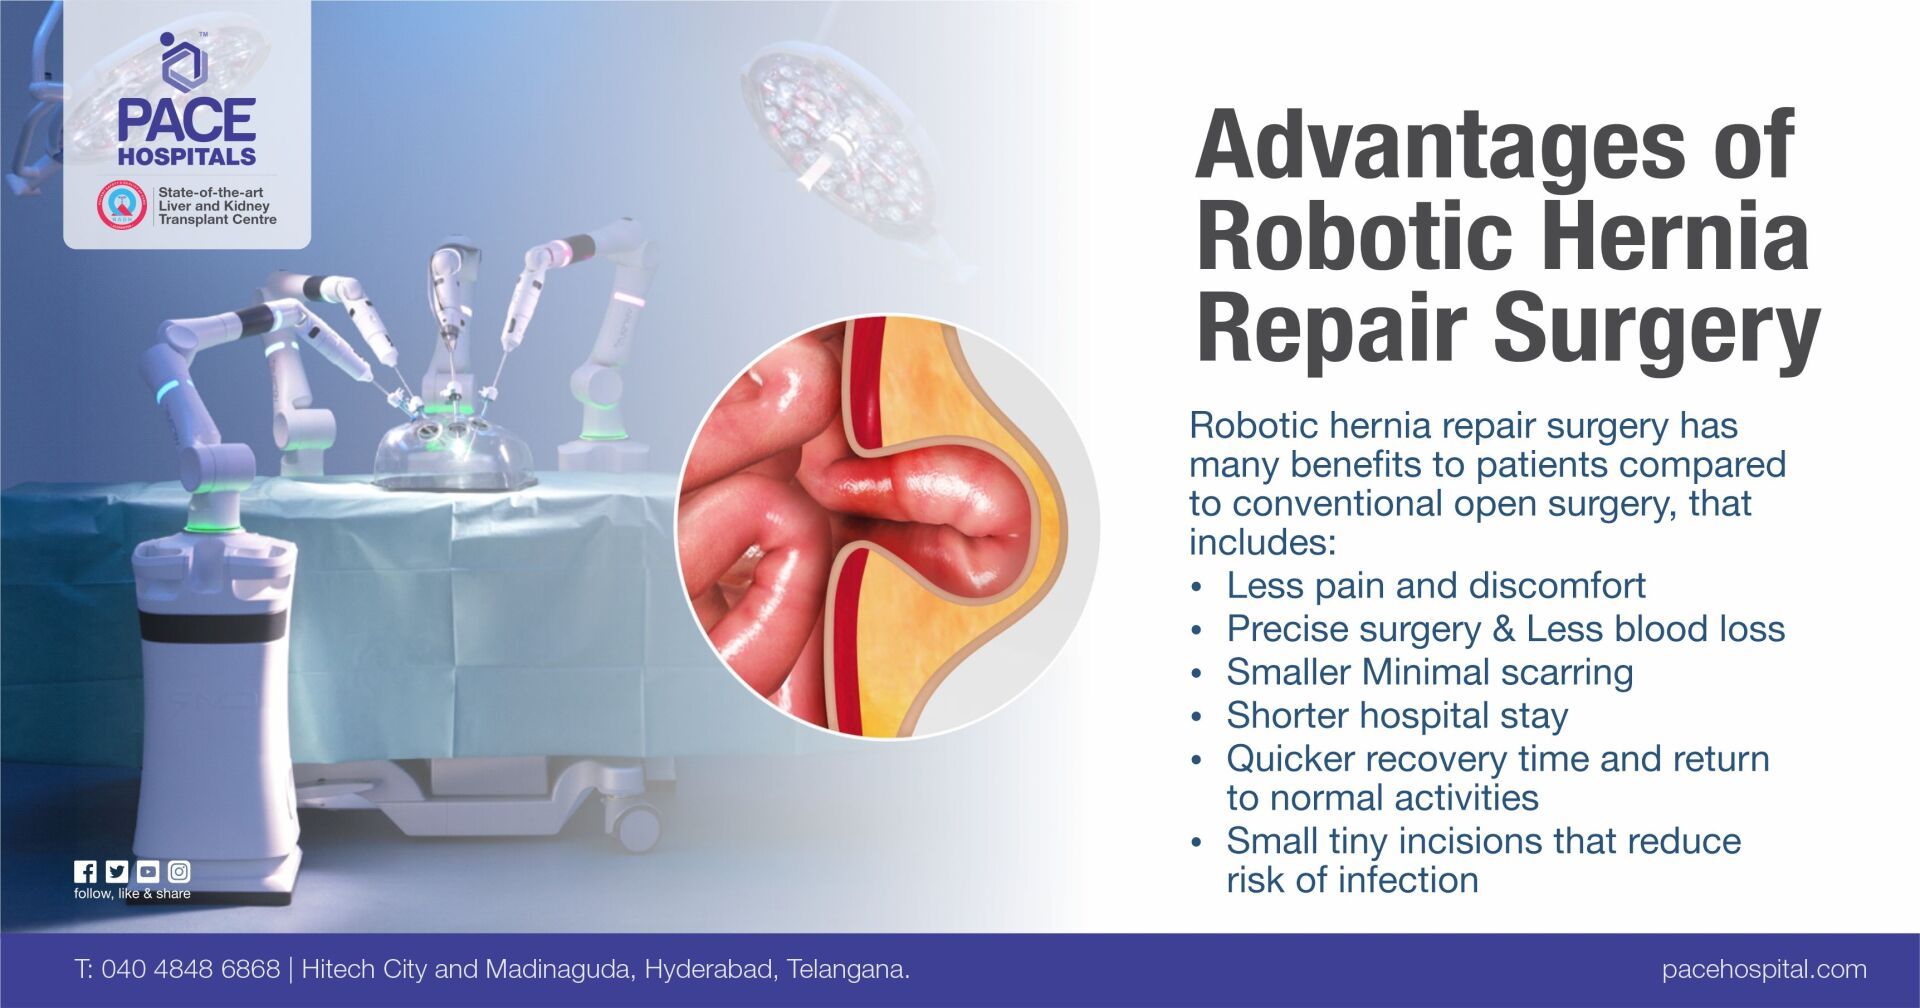 Advantages and Benefits of Robotic Hernia Repair Surgery in Hyderabad